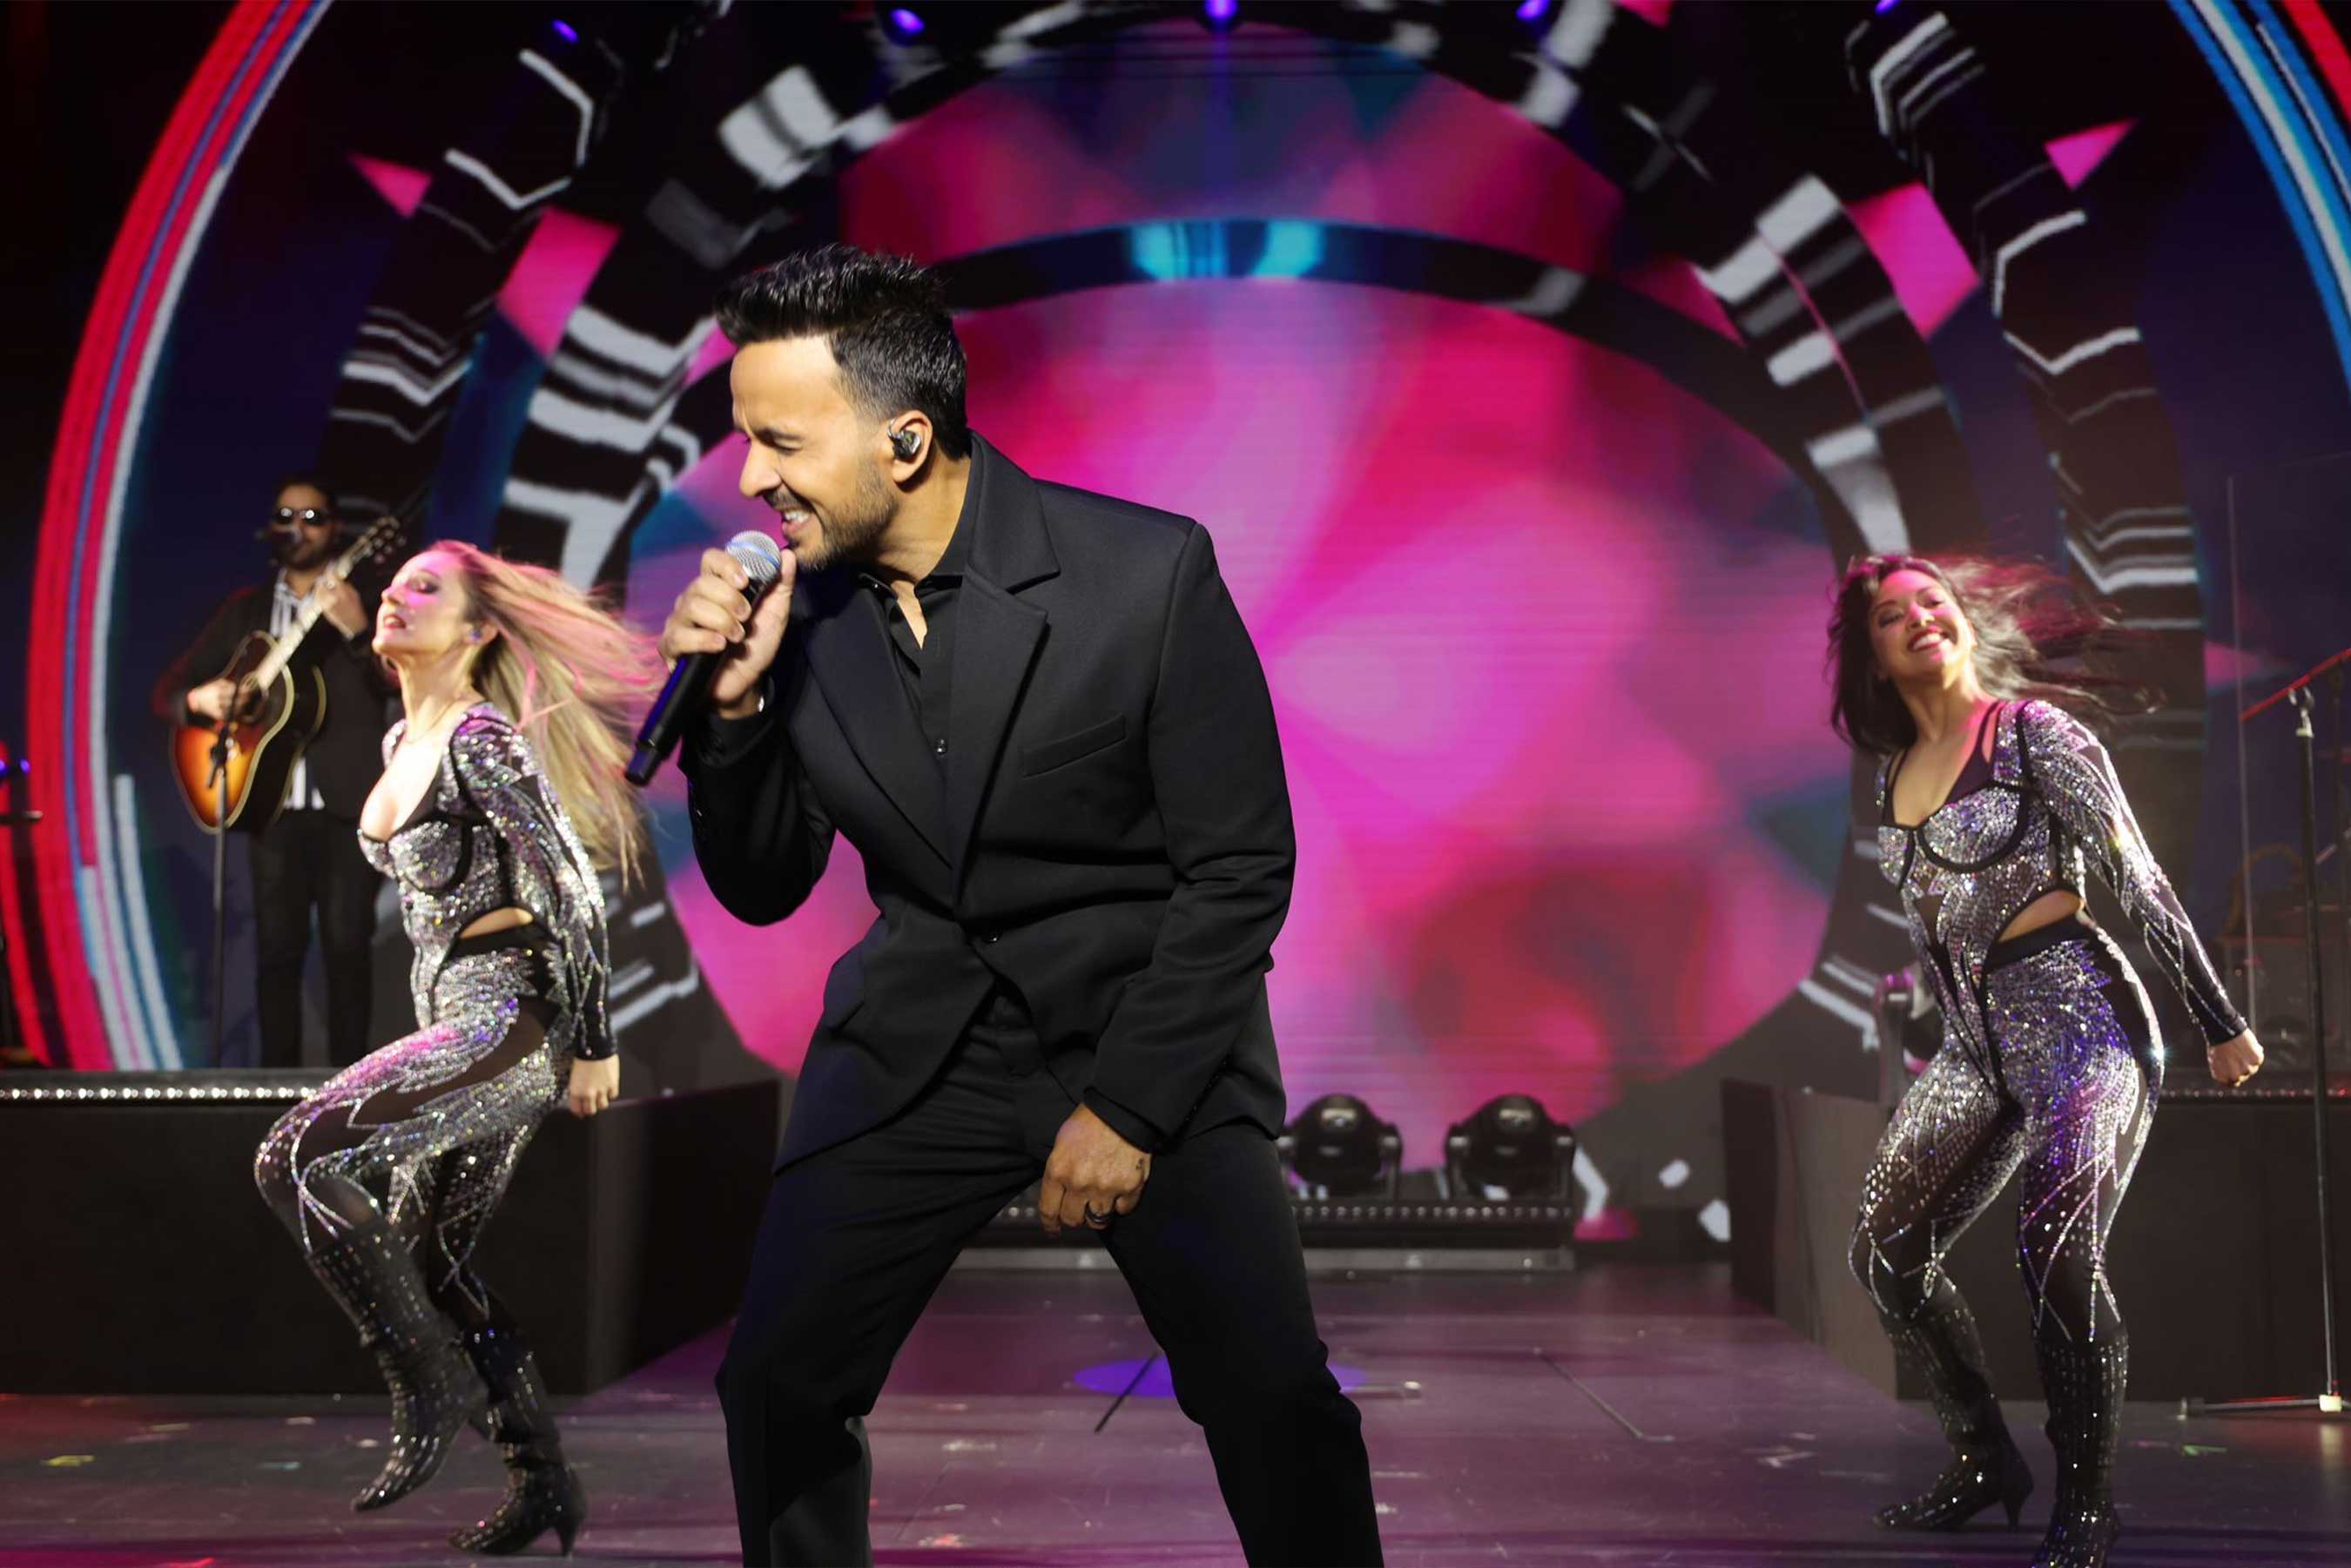 Luis Fonsi, global music sensation and appointed godfather to NCL’s all-new Norwegian Viva, headlines the christening celebration event with an exclusive concert on board.